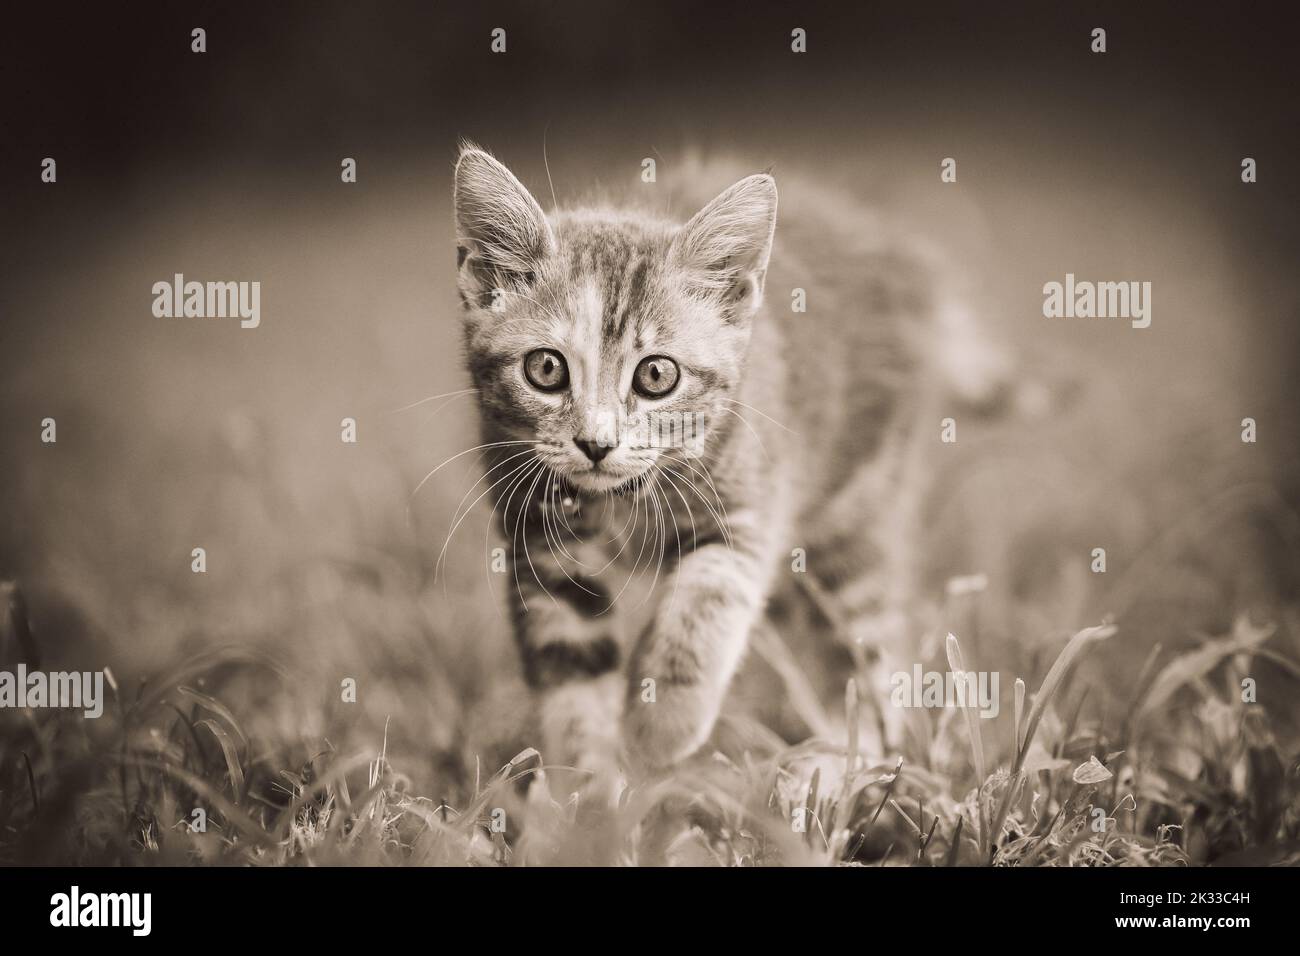 Young kitten walking on the grass looking at camera Stock Photo